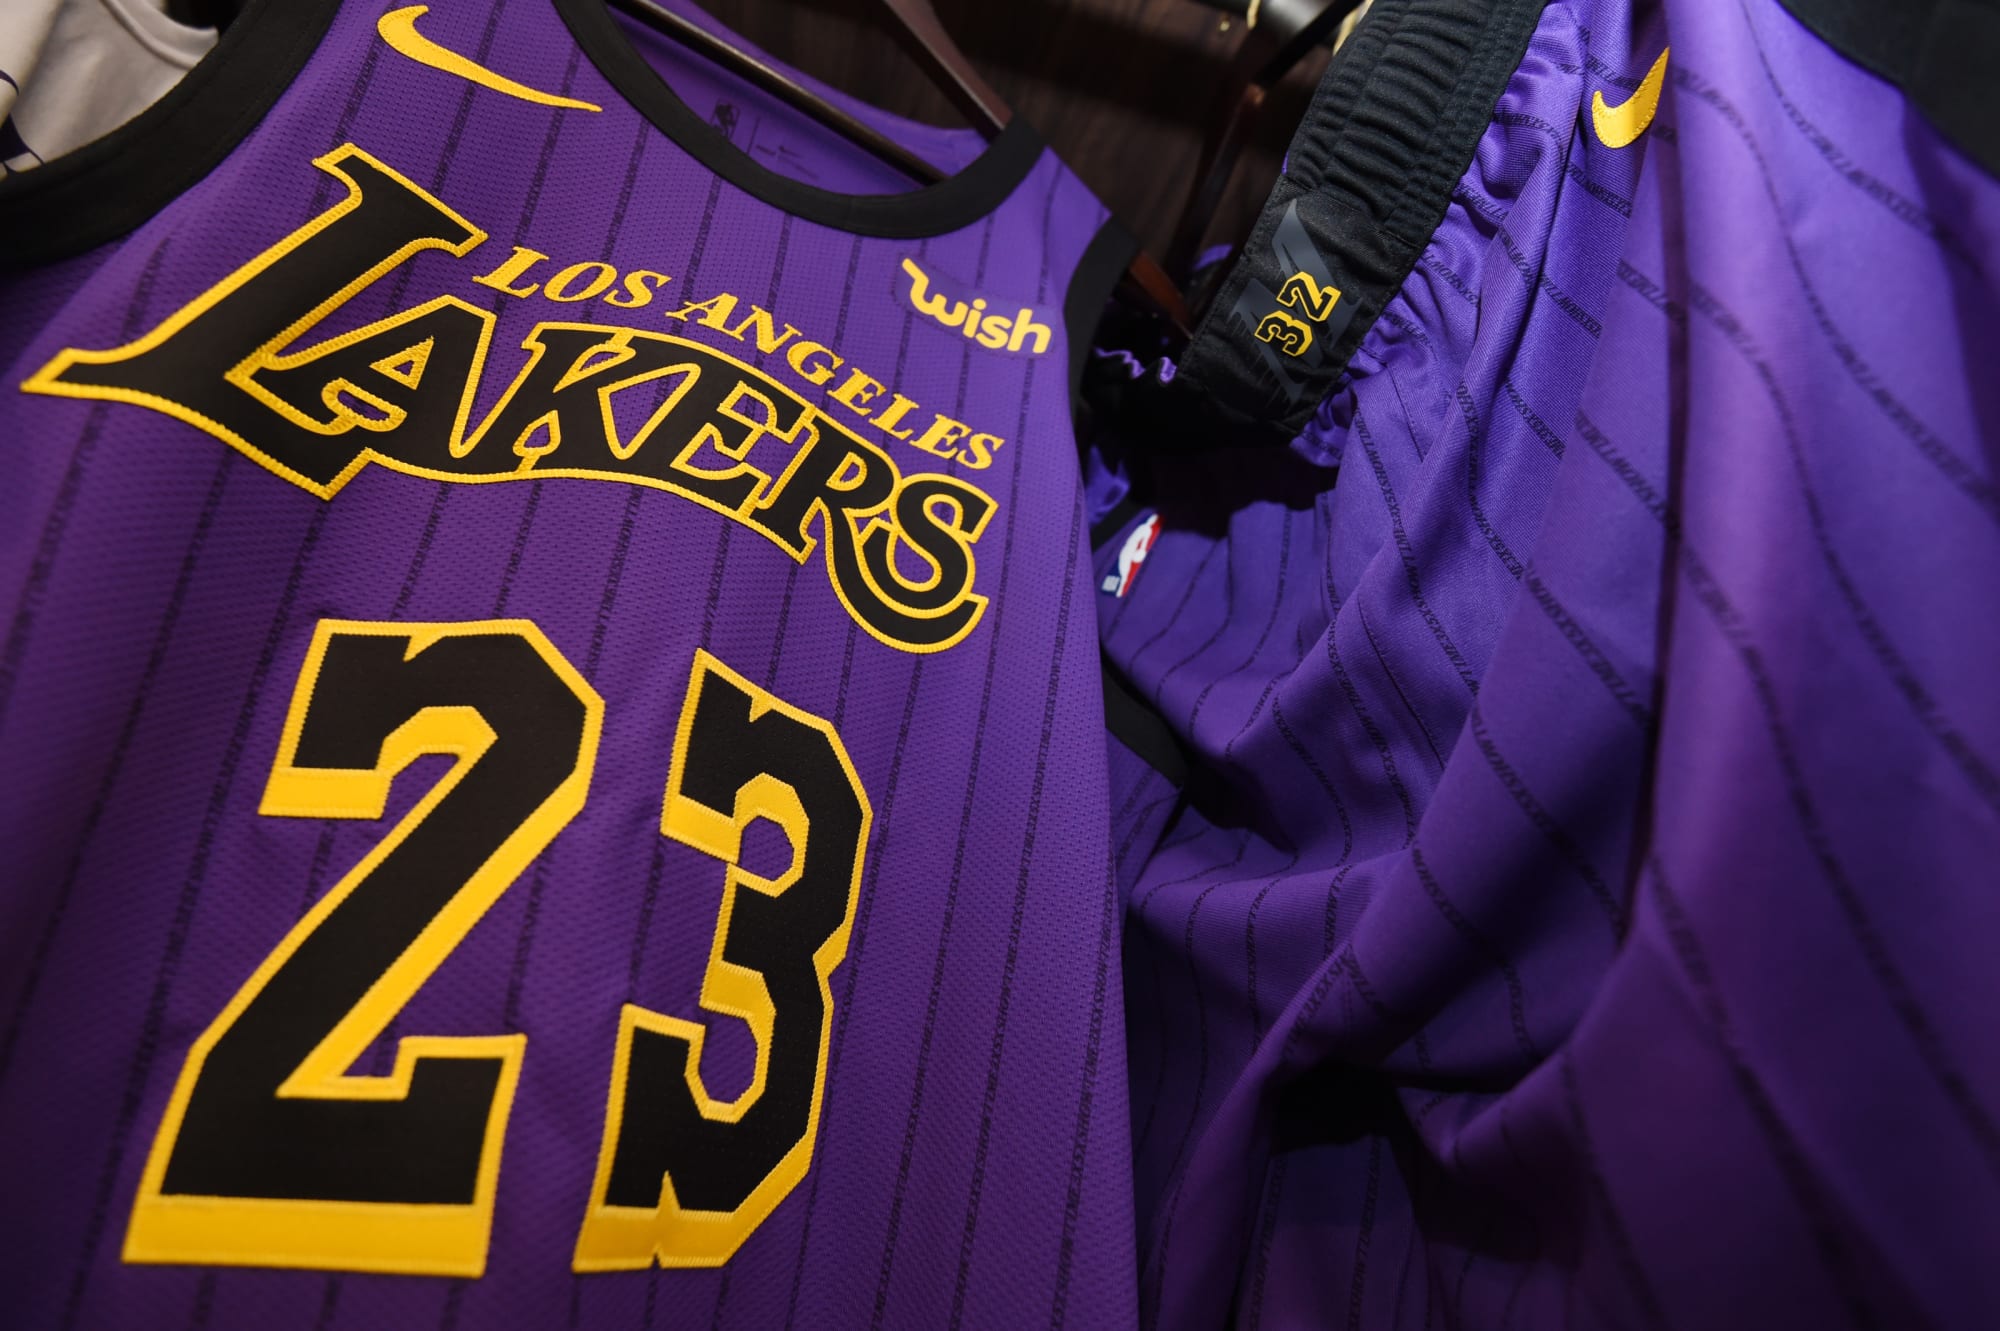 The Lakers New Uniforms Are Indeed Bringing Back The Showtime Colors